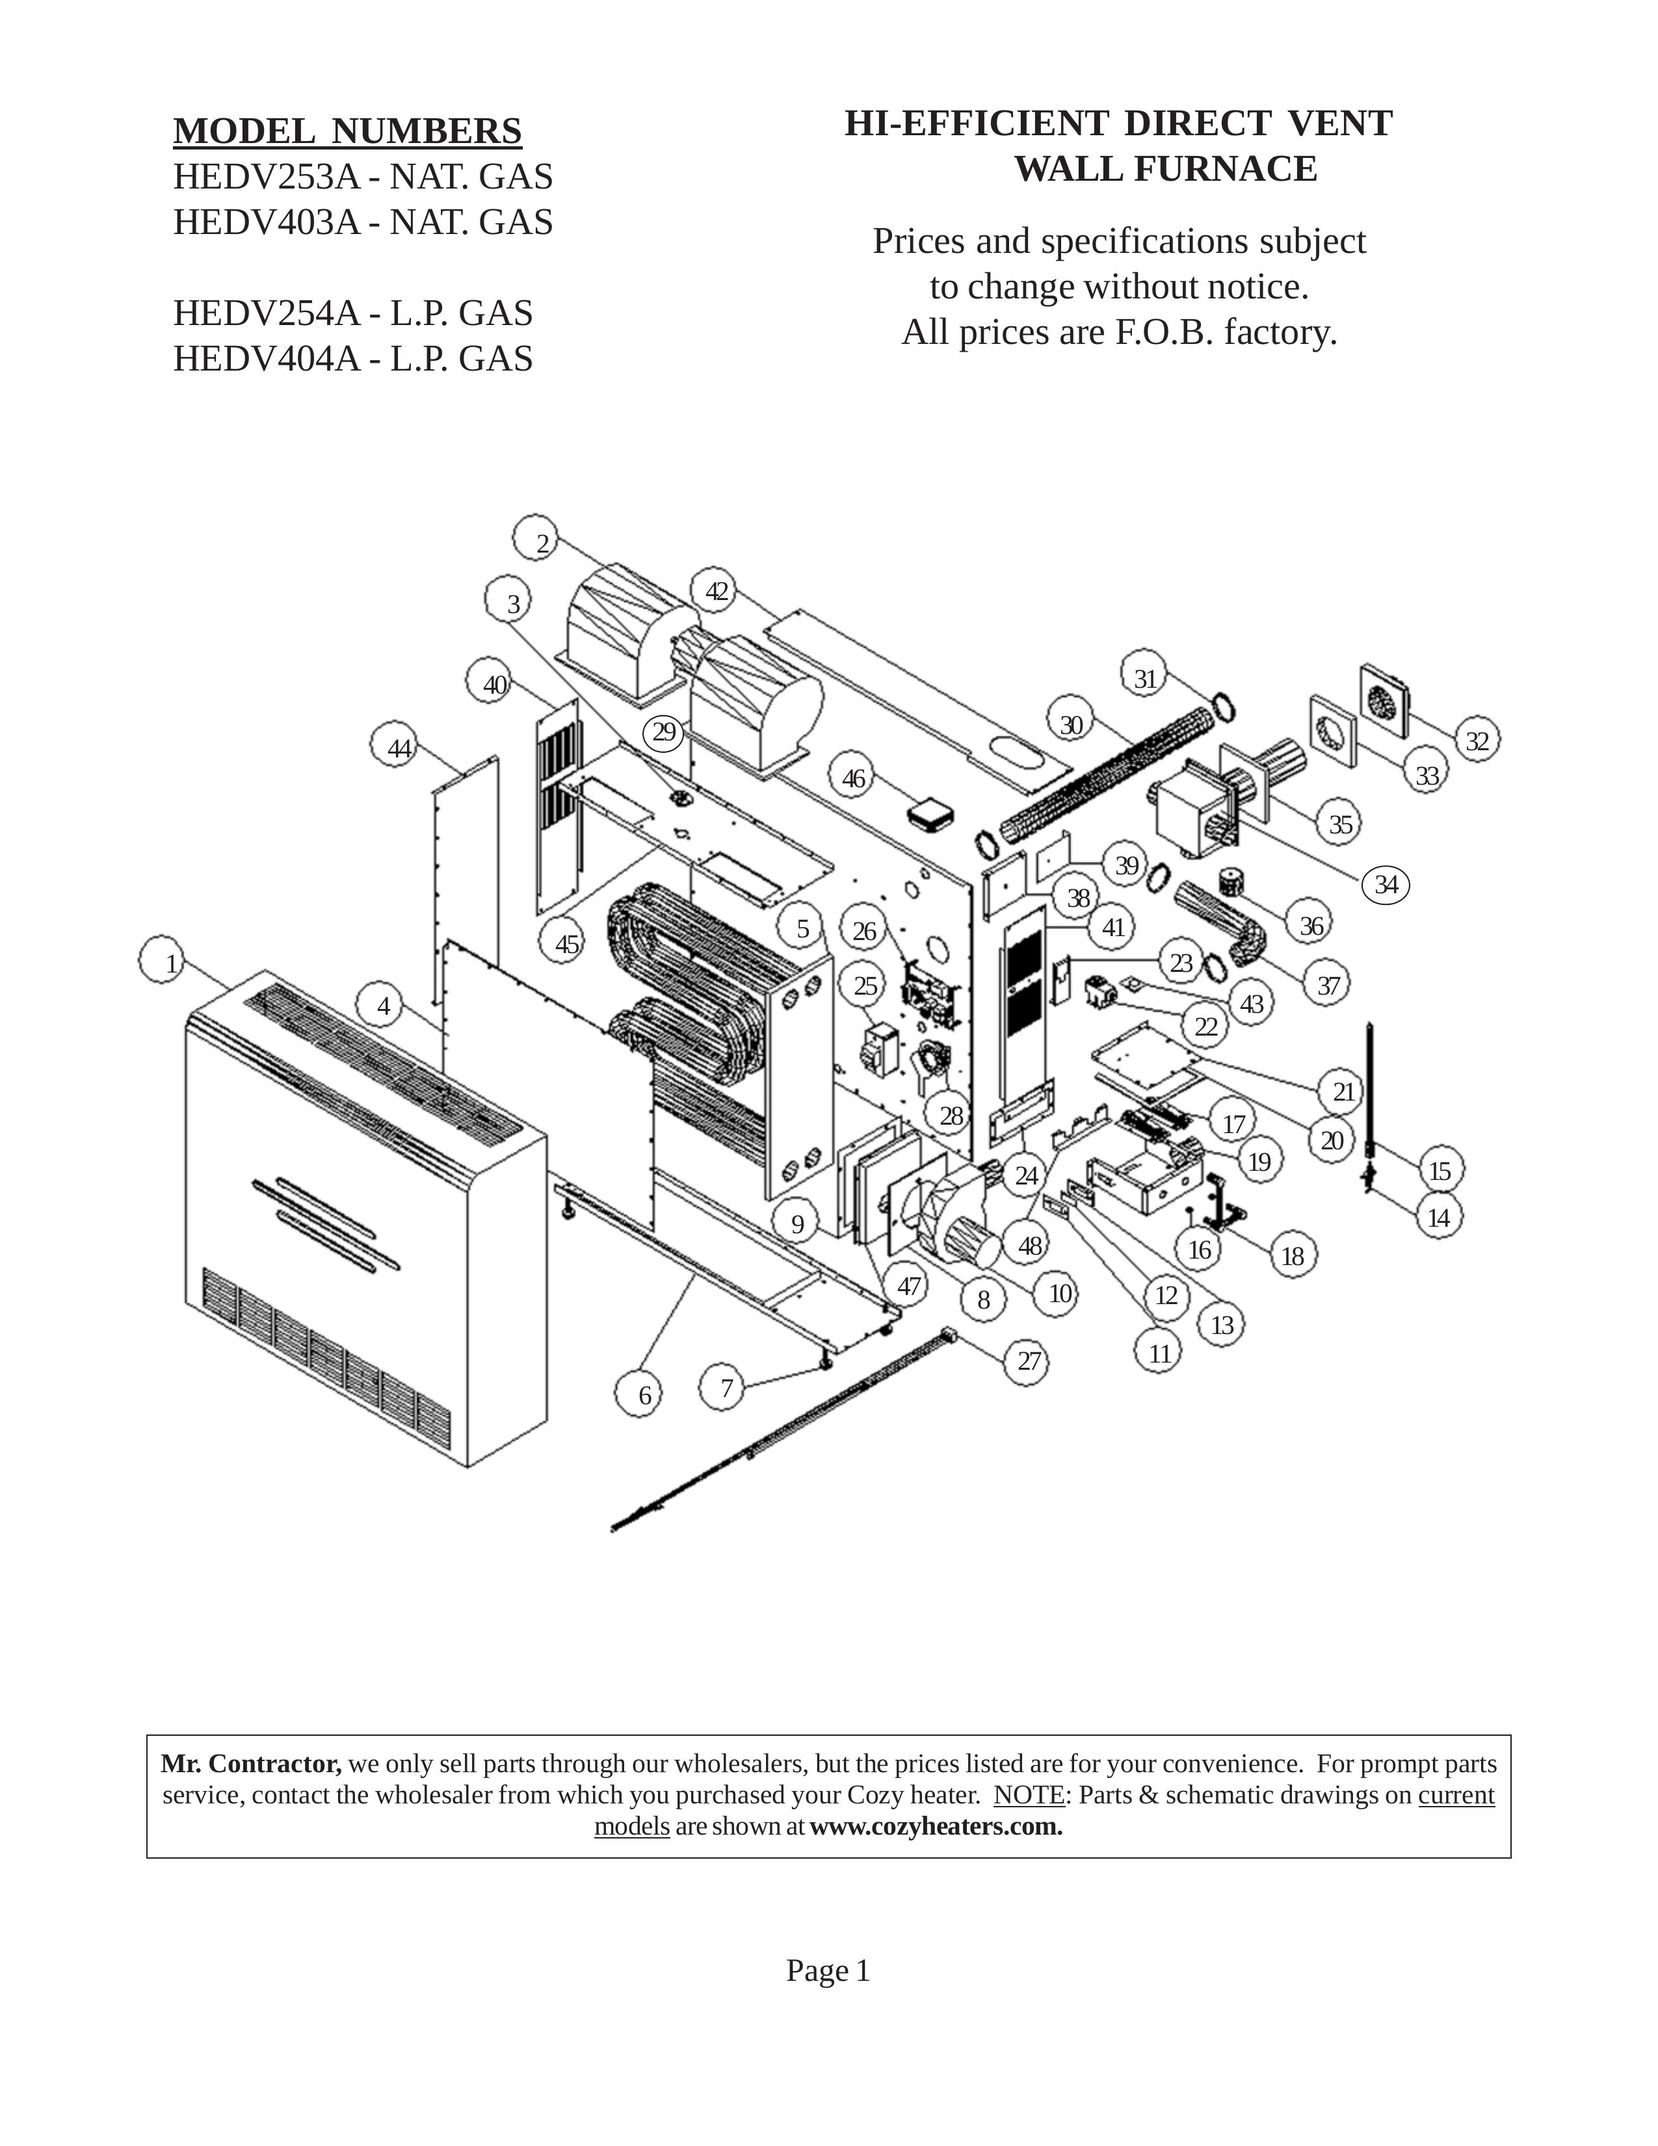 Louisville Tin and Stove HEDV254A Furnace User Manual